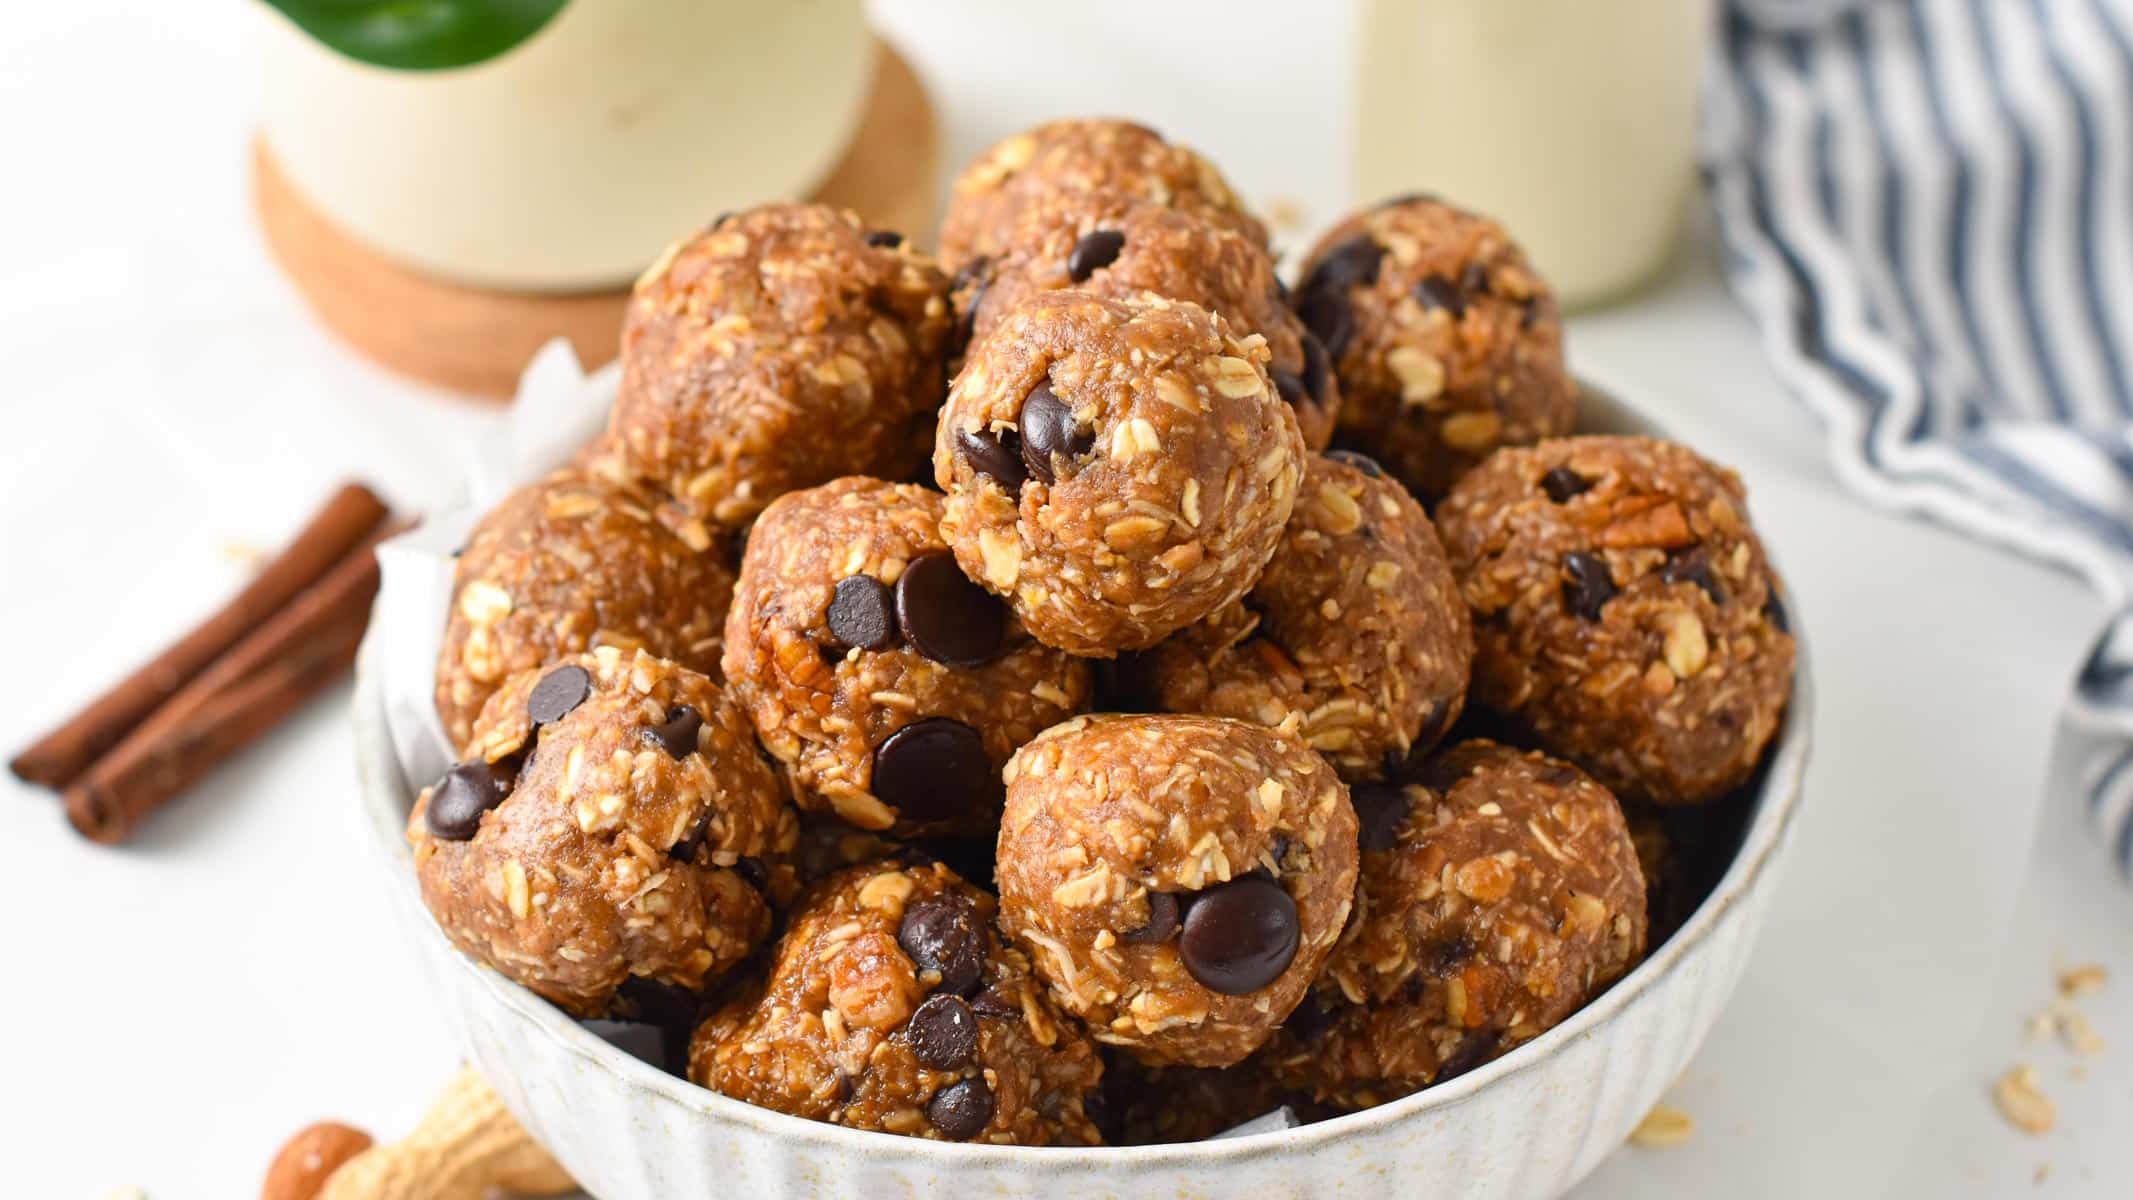 a bowl filled with No Bake Peanut Butter Oatmeal Energy Balls filled with chocolate chips